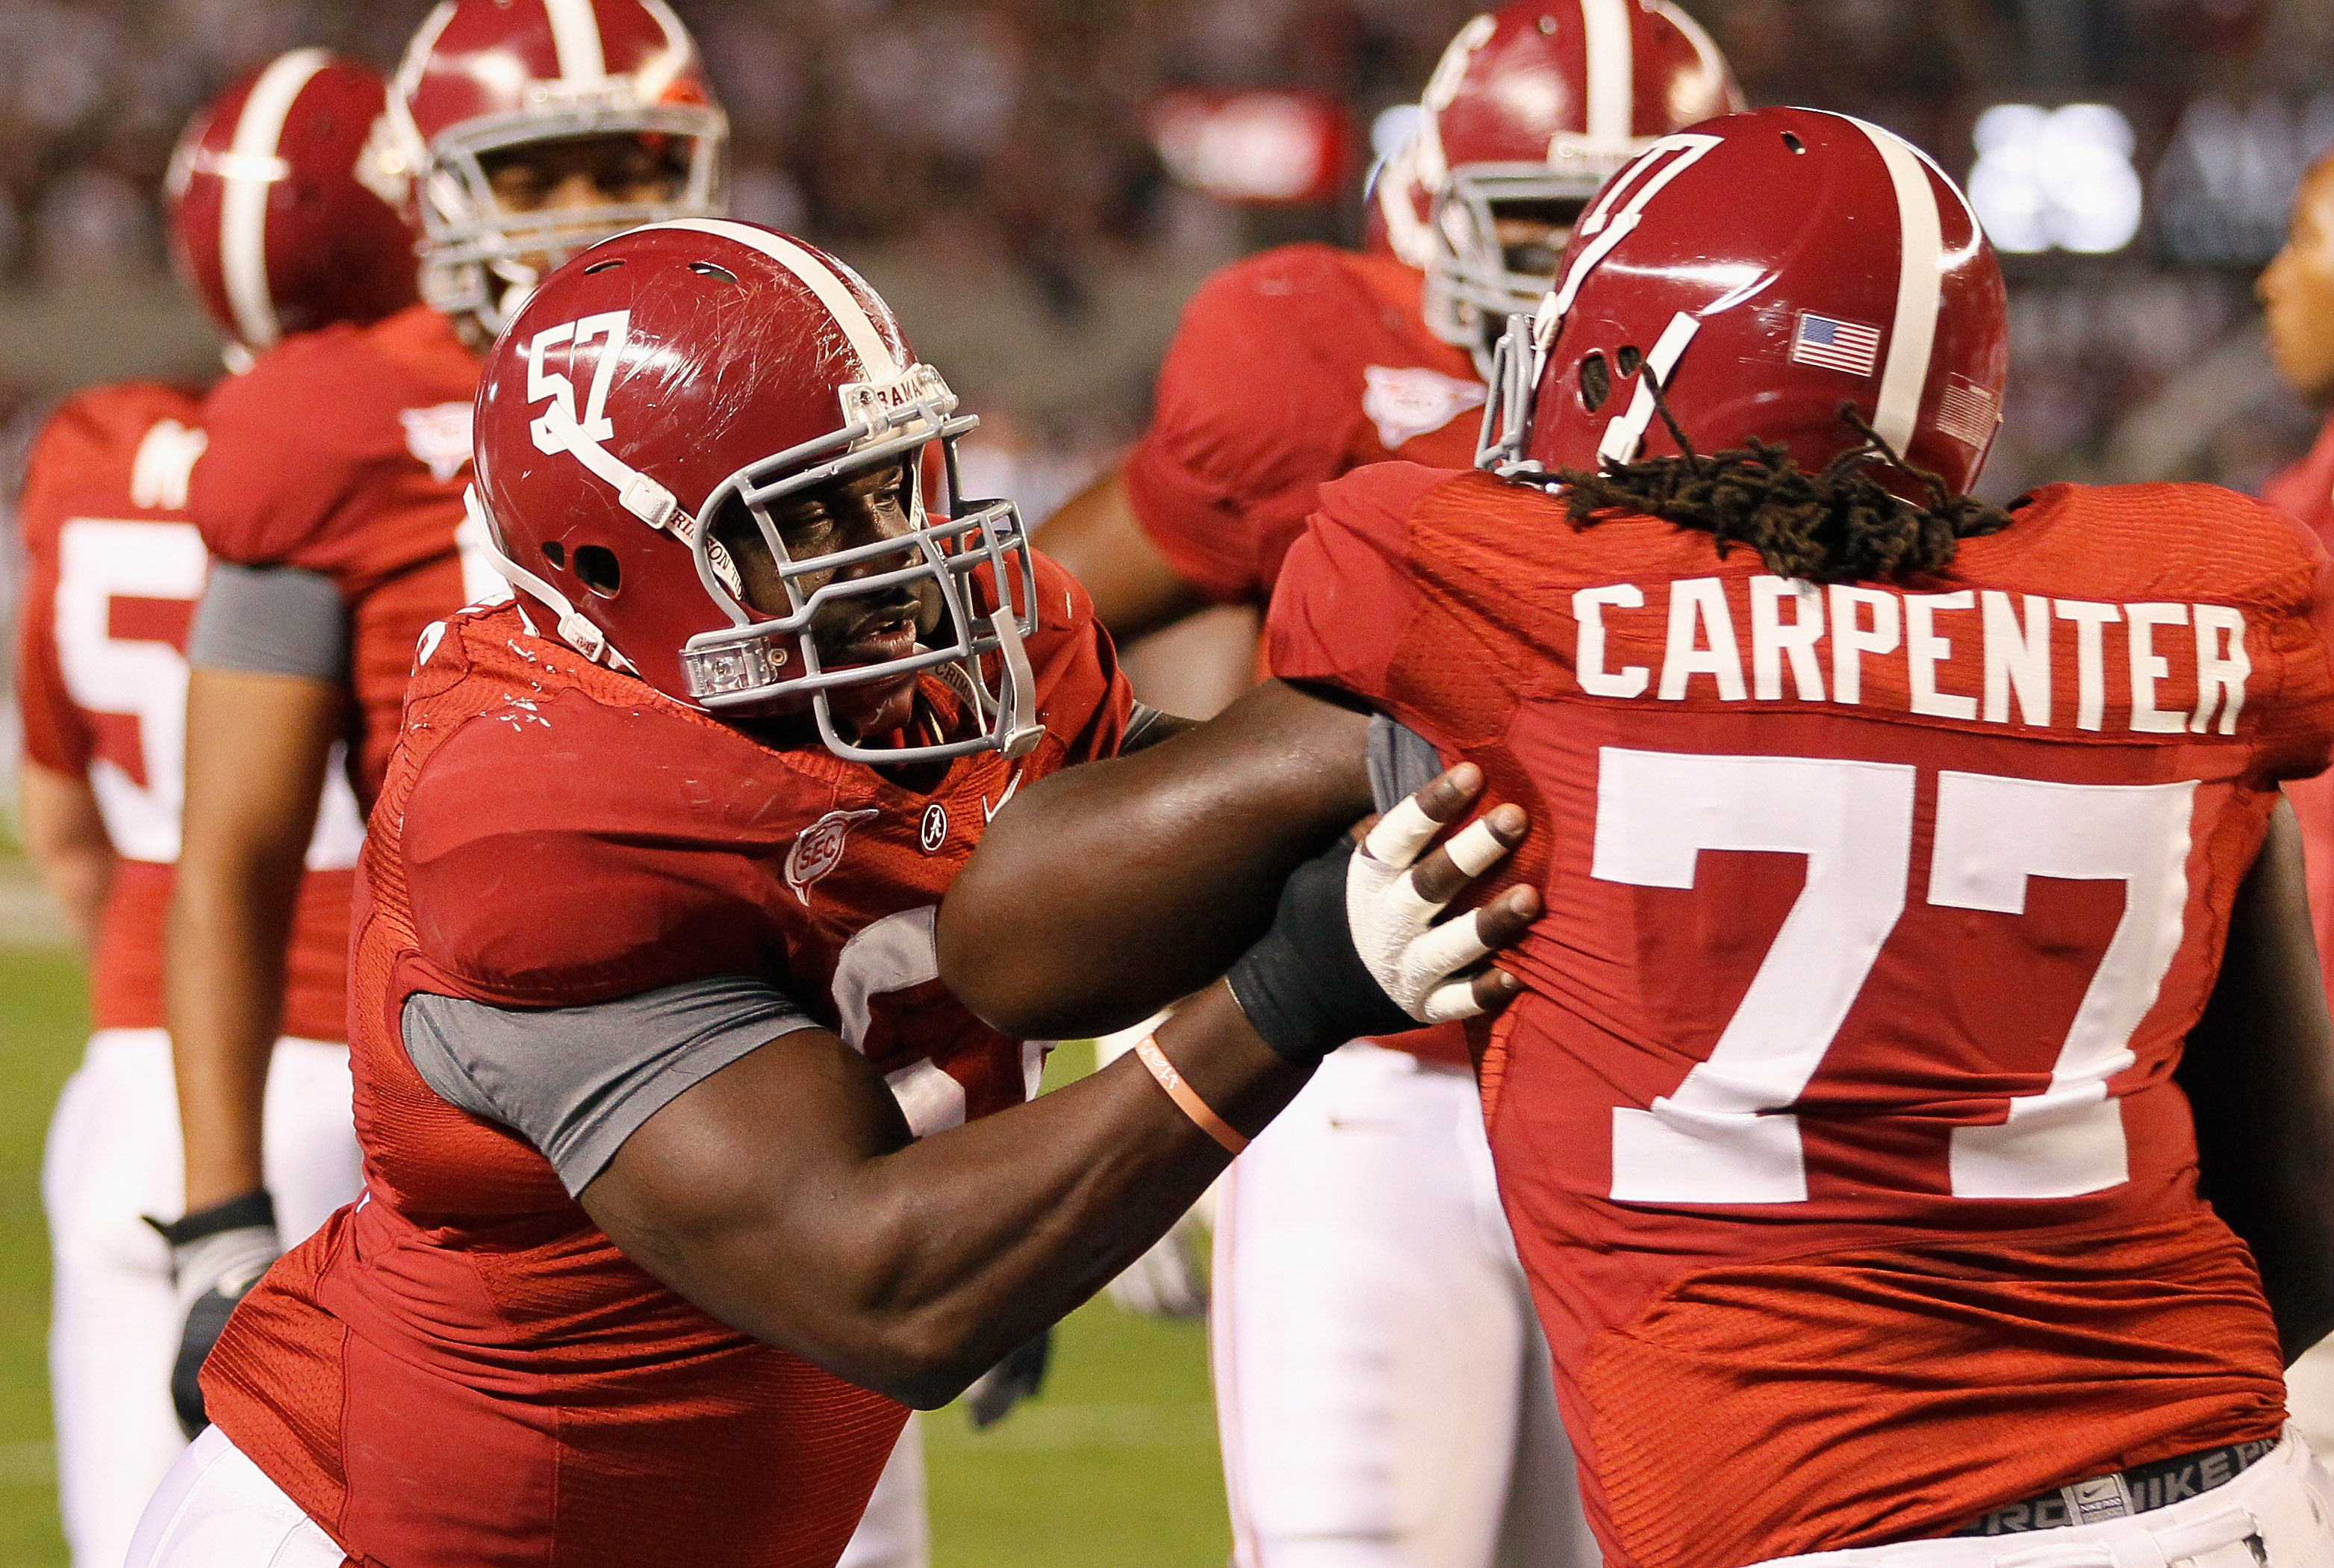 TUSCALOOSA, AL - OCTOBER 16:  Marcell Dareus #57 and James Carpenter #77 of the Alabama Crimson Tide against the Ole Miss Rebels at Bryant-Denny Stadium on October 16, 2010 in Tuscaloosa, Alabama.  (Photo by Kevin C. Cox/Getty Images)